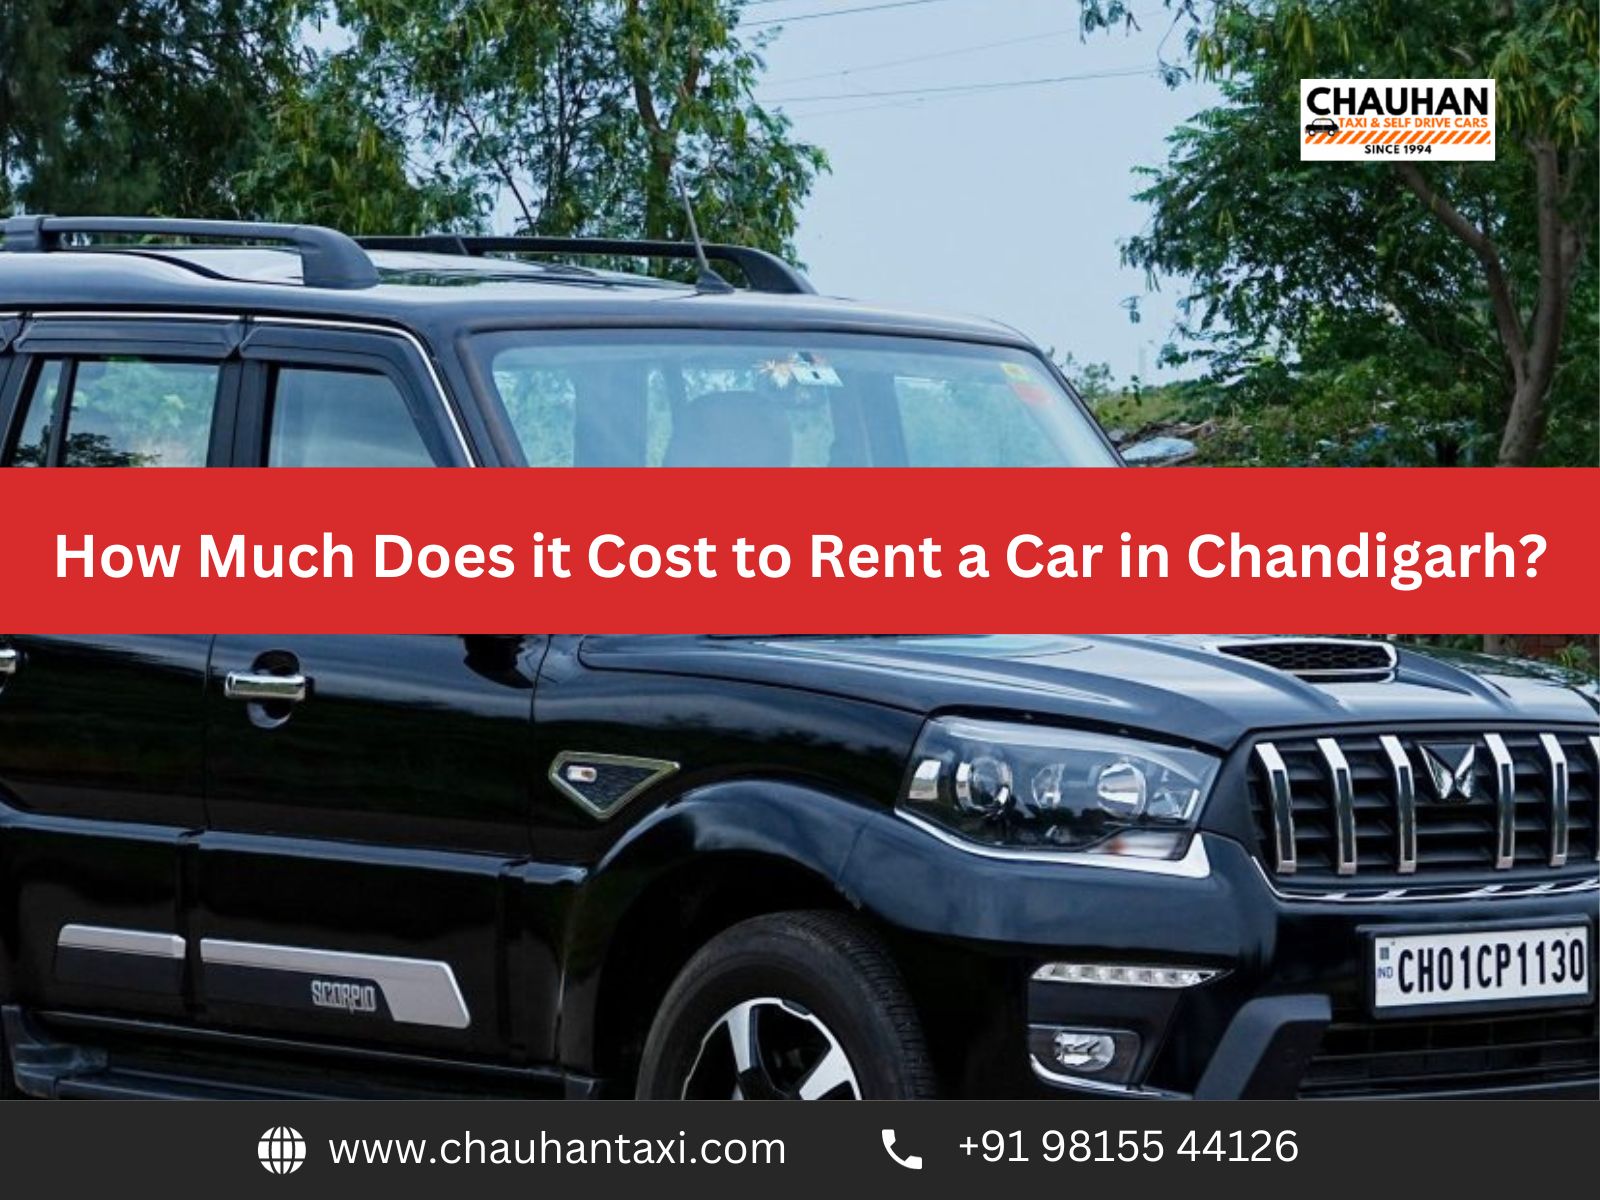 how much cost to rent a car in chandigarh